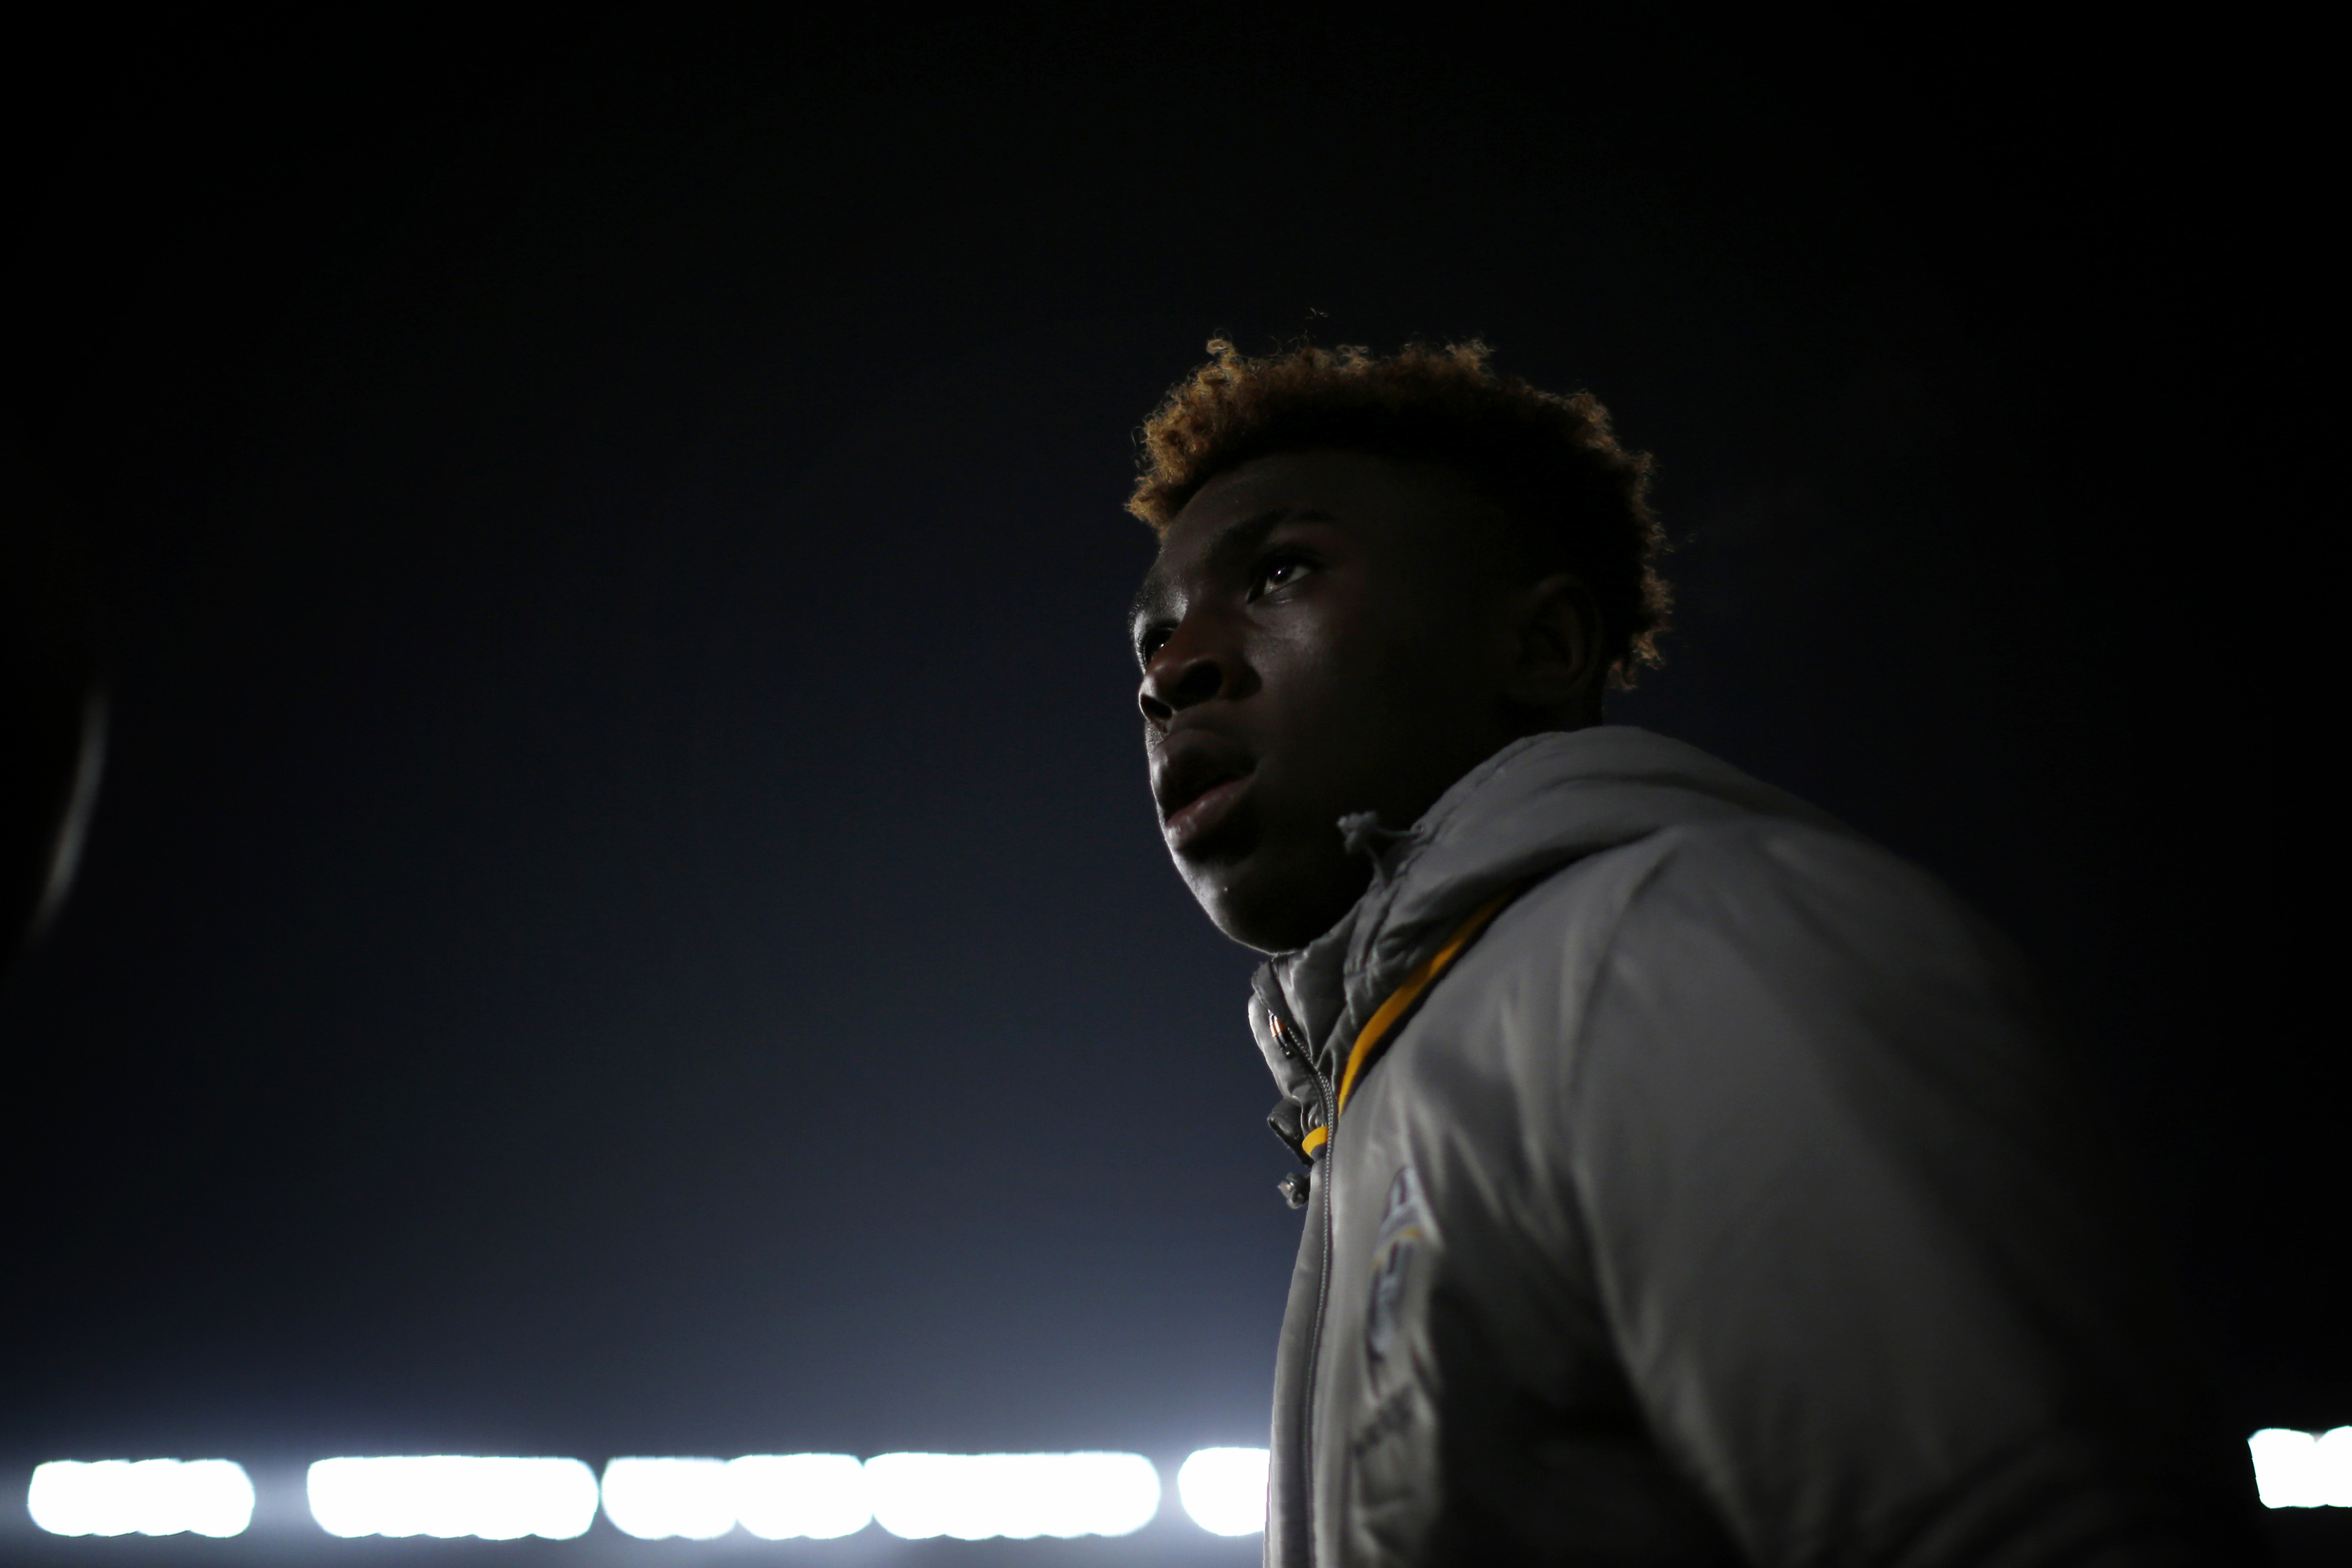 Juventus' Italian forward Moise Kean attends the Italian Serie A football match between Juventus and Pescara at the Juventus Stadium in Turin on November 19, 2016. / AFP / MARCO BERTORELLO        (Photo credit should read MARCO BERTORELLO/AFP/Getty Images)